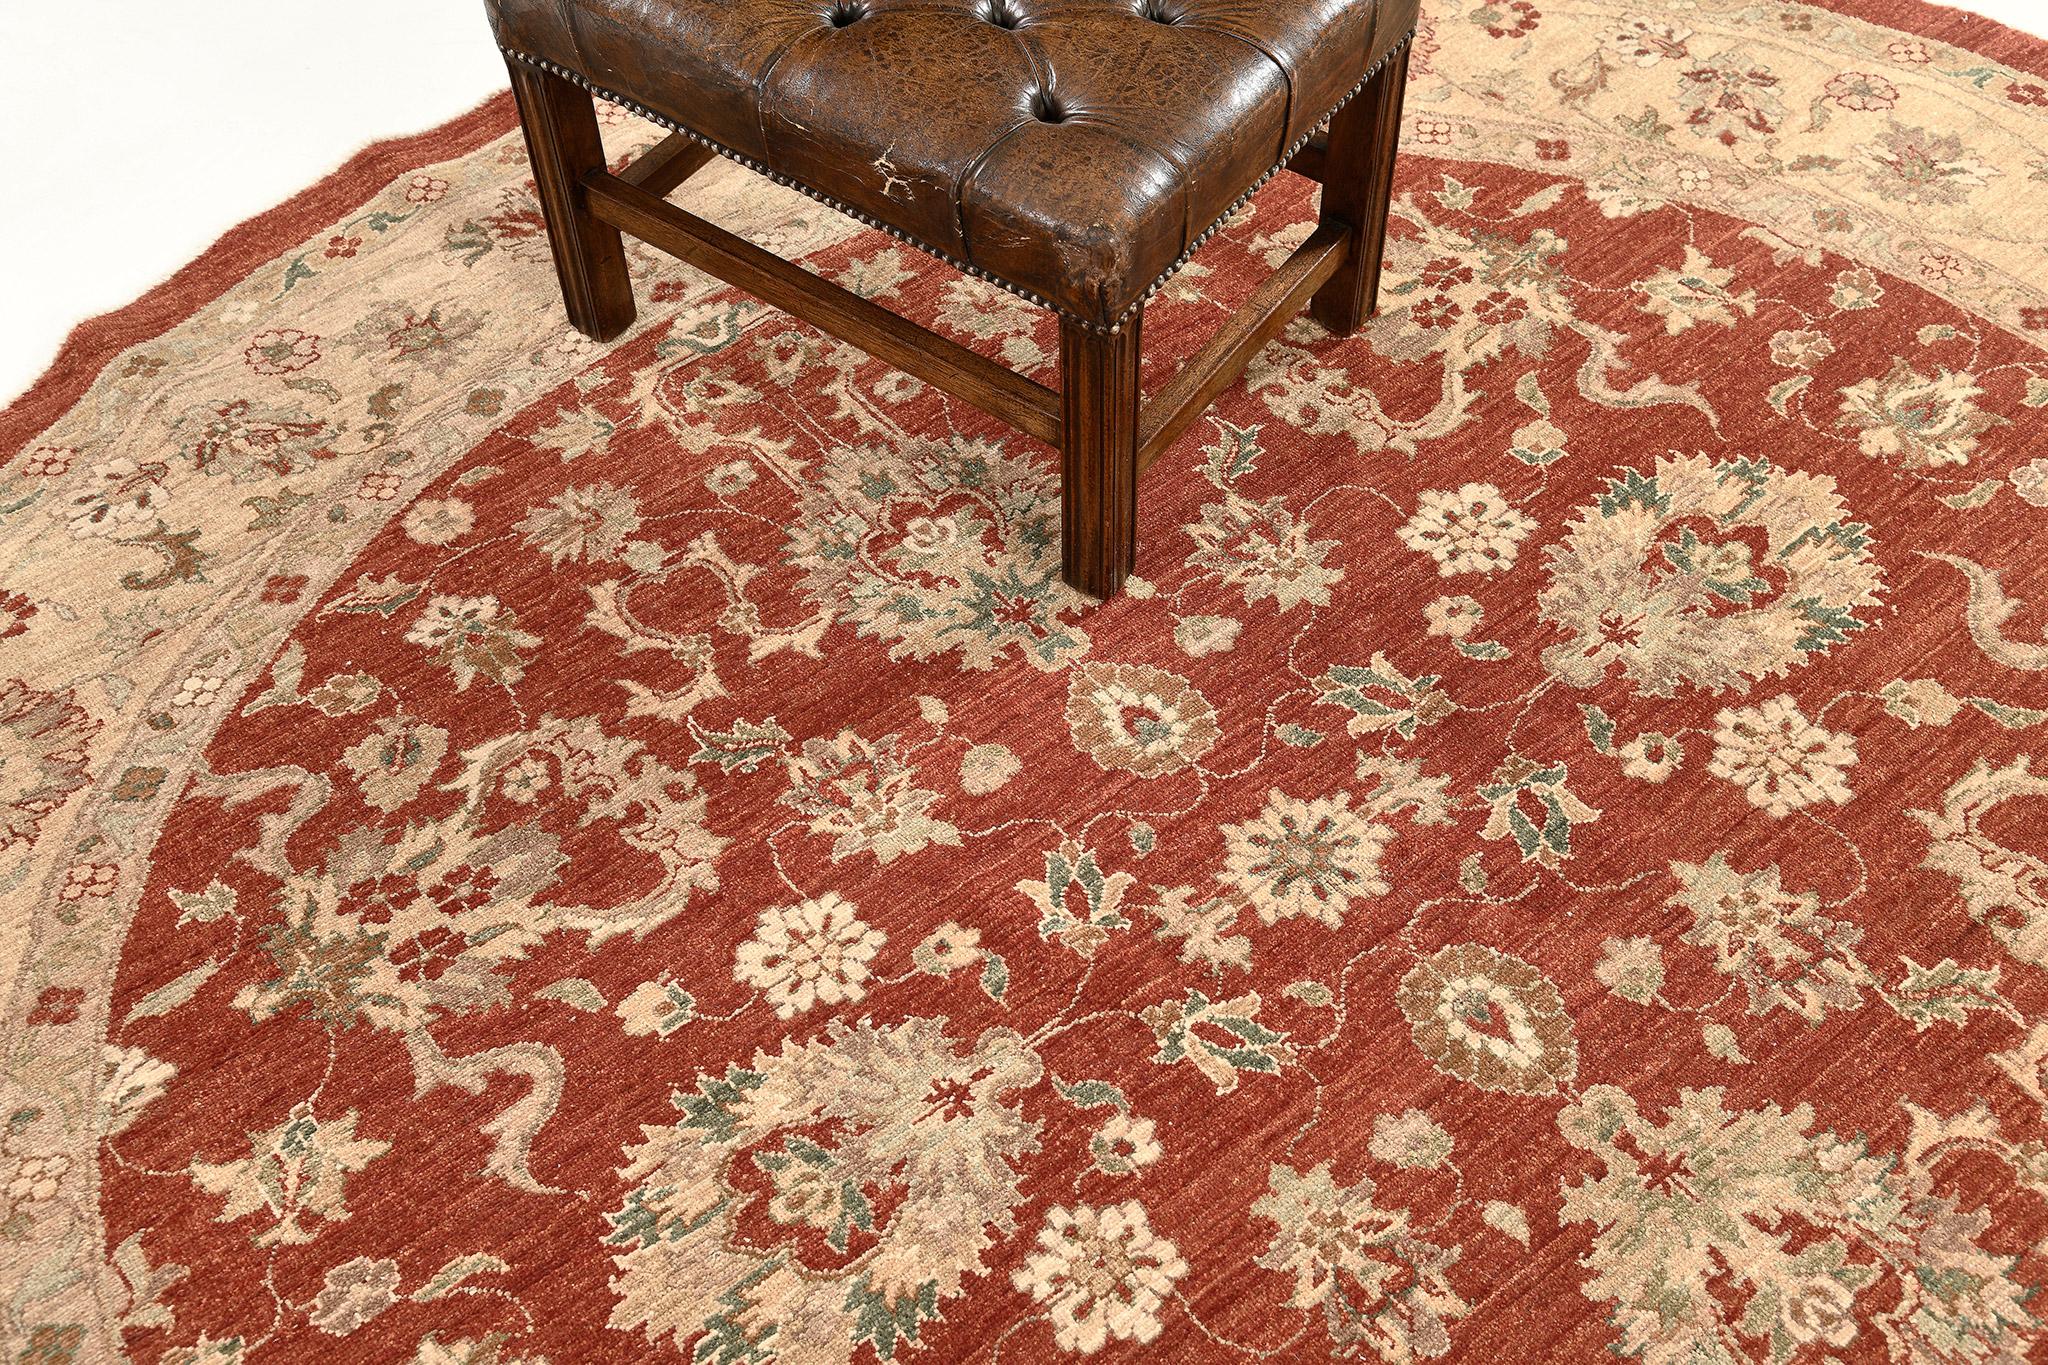 Series of magical vines and florid ornaments are reflected through gold embellishments to blooming and dazzling dusty red fields. The borders are beautifully hand-woven that created from a vegetable dye to form an elegant Sultanabad Round Rug. Truly